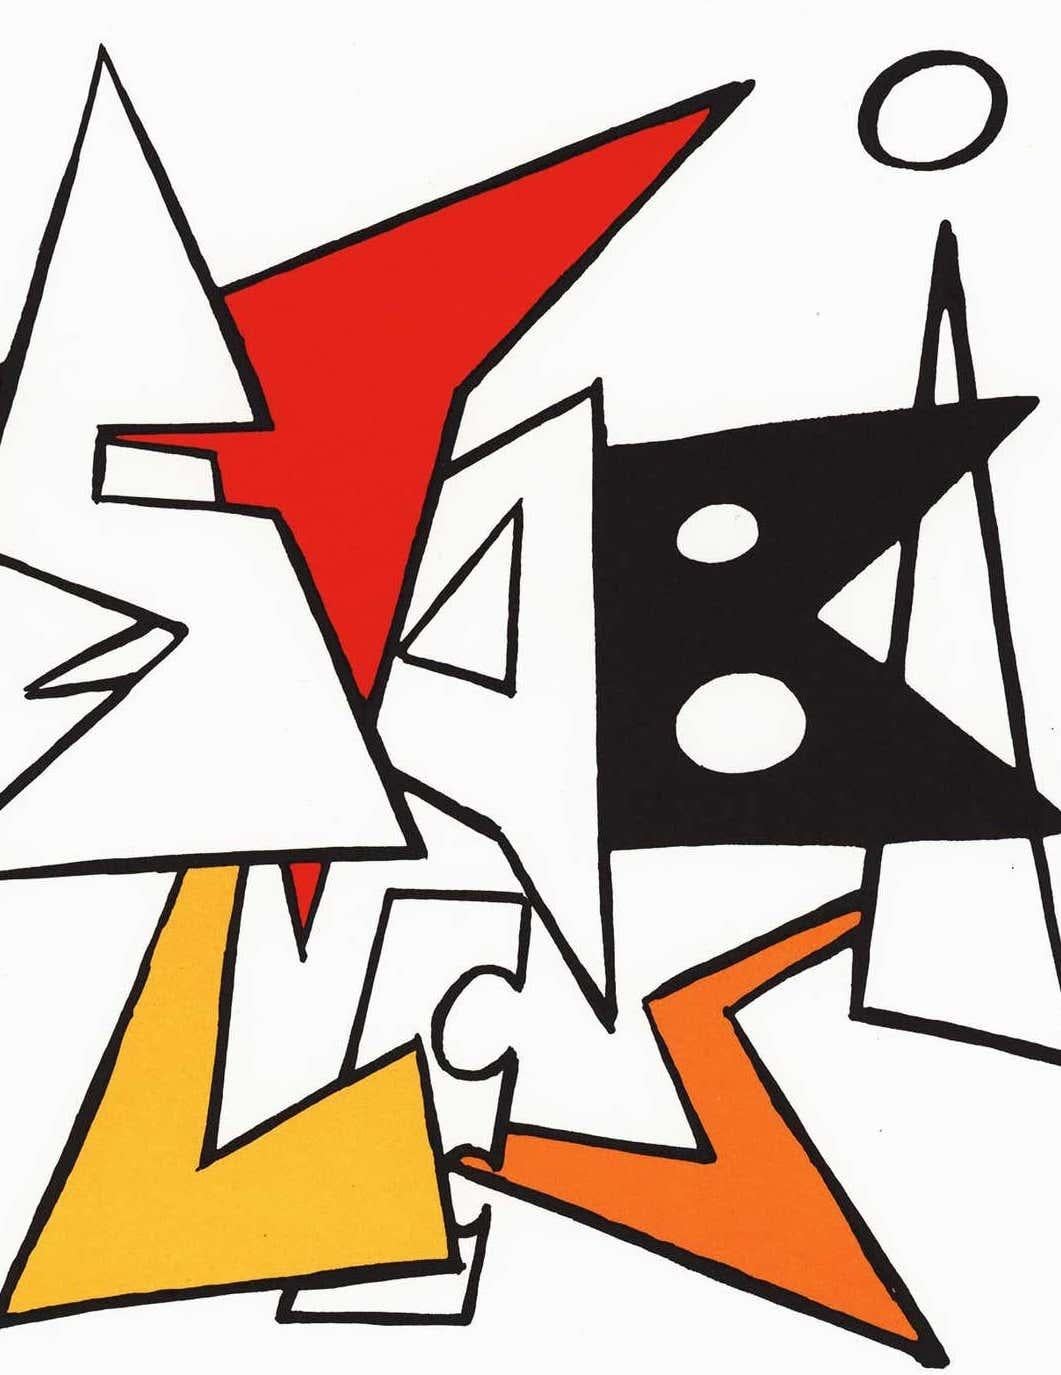 Alexander Calder Lithographic cover c. 1963 from Derrière le miroir:

Lithographic cover page in colors; 11 x 15 inches.
Very good overall vintage condition.
Unsigned from an edition of unknown with crisp bright colors.
Published by: Galerie Maeght,